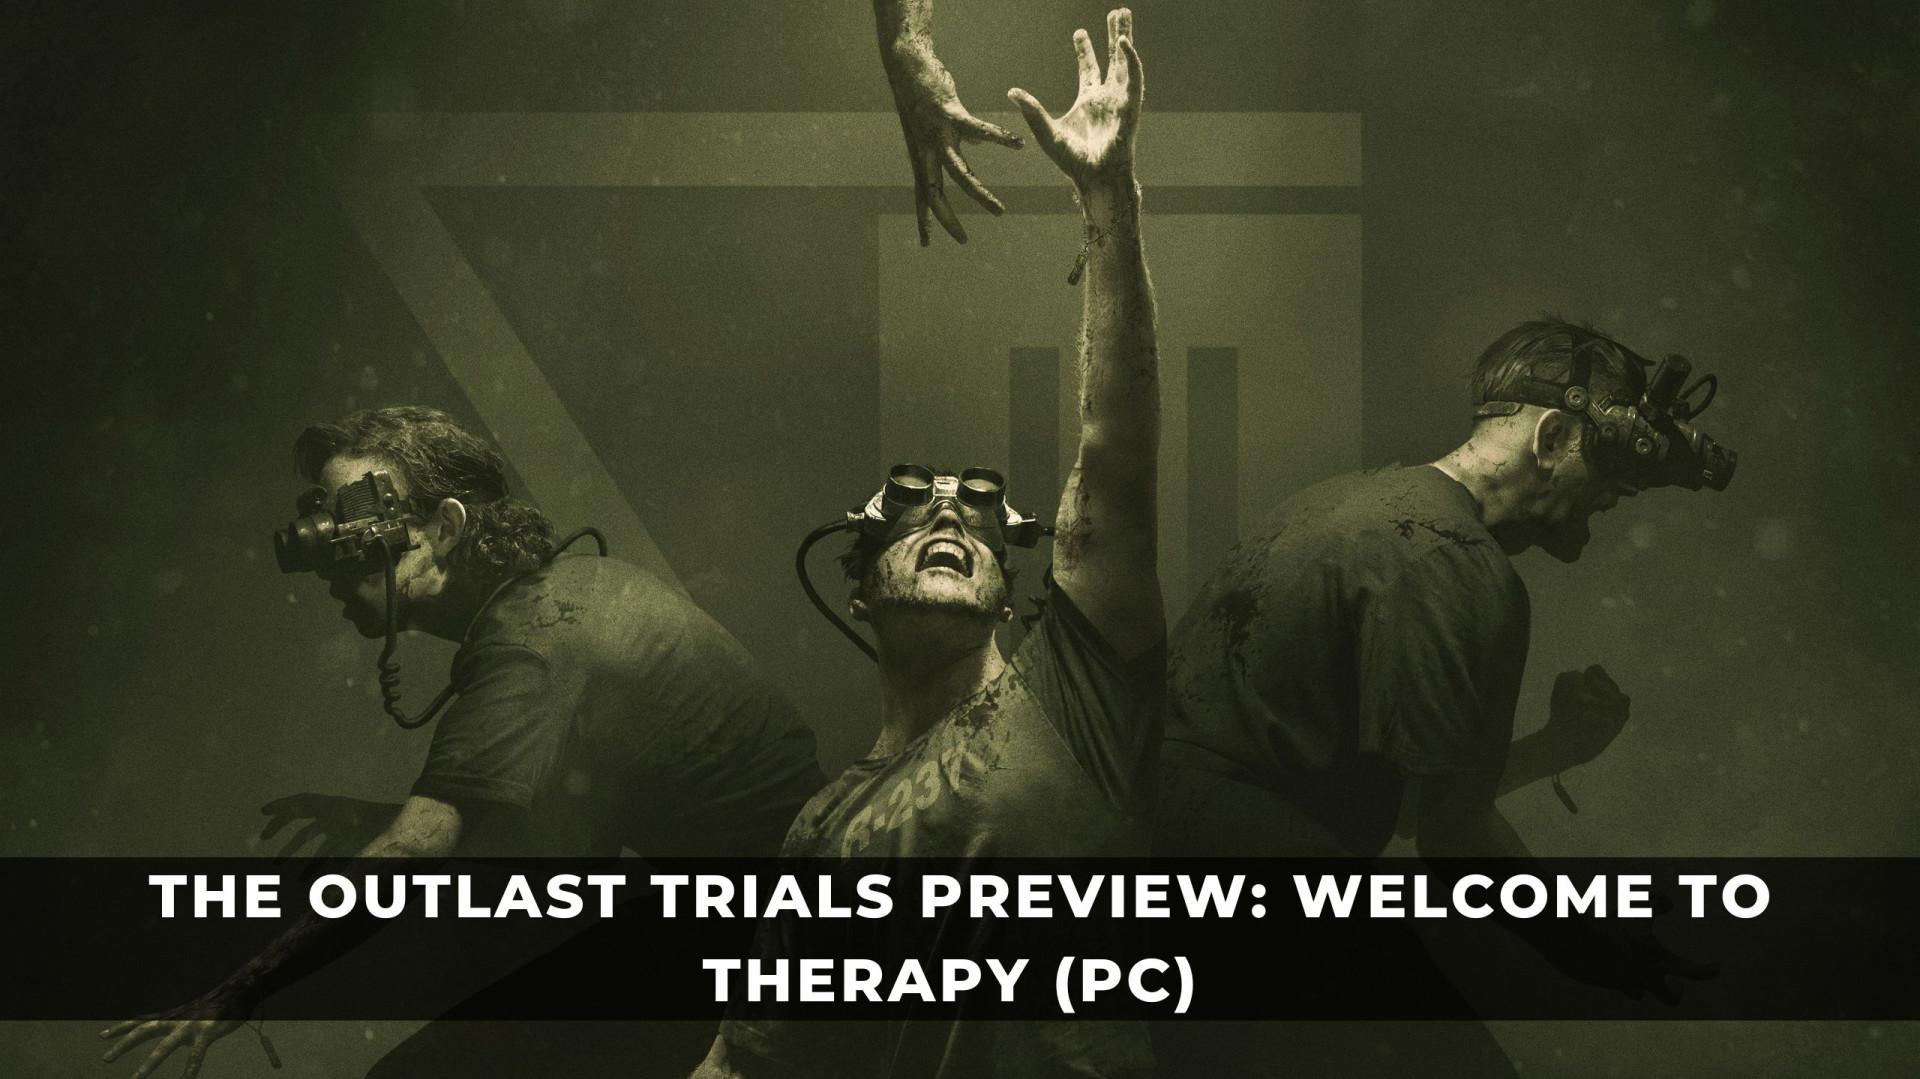 The Outlast Trials Preview Welcome to Therapy PC   KeenGamer